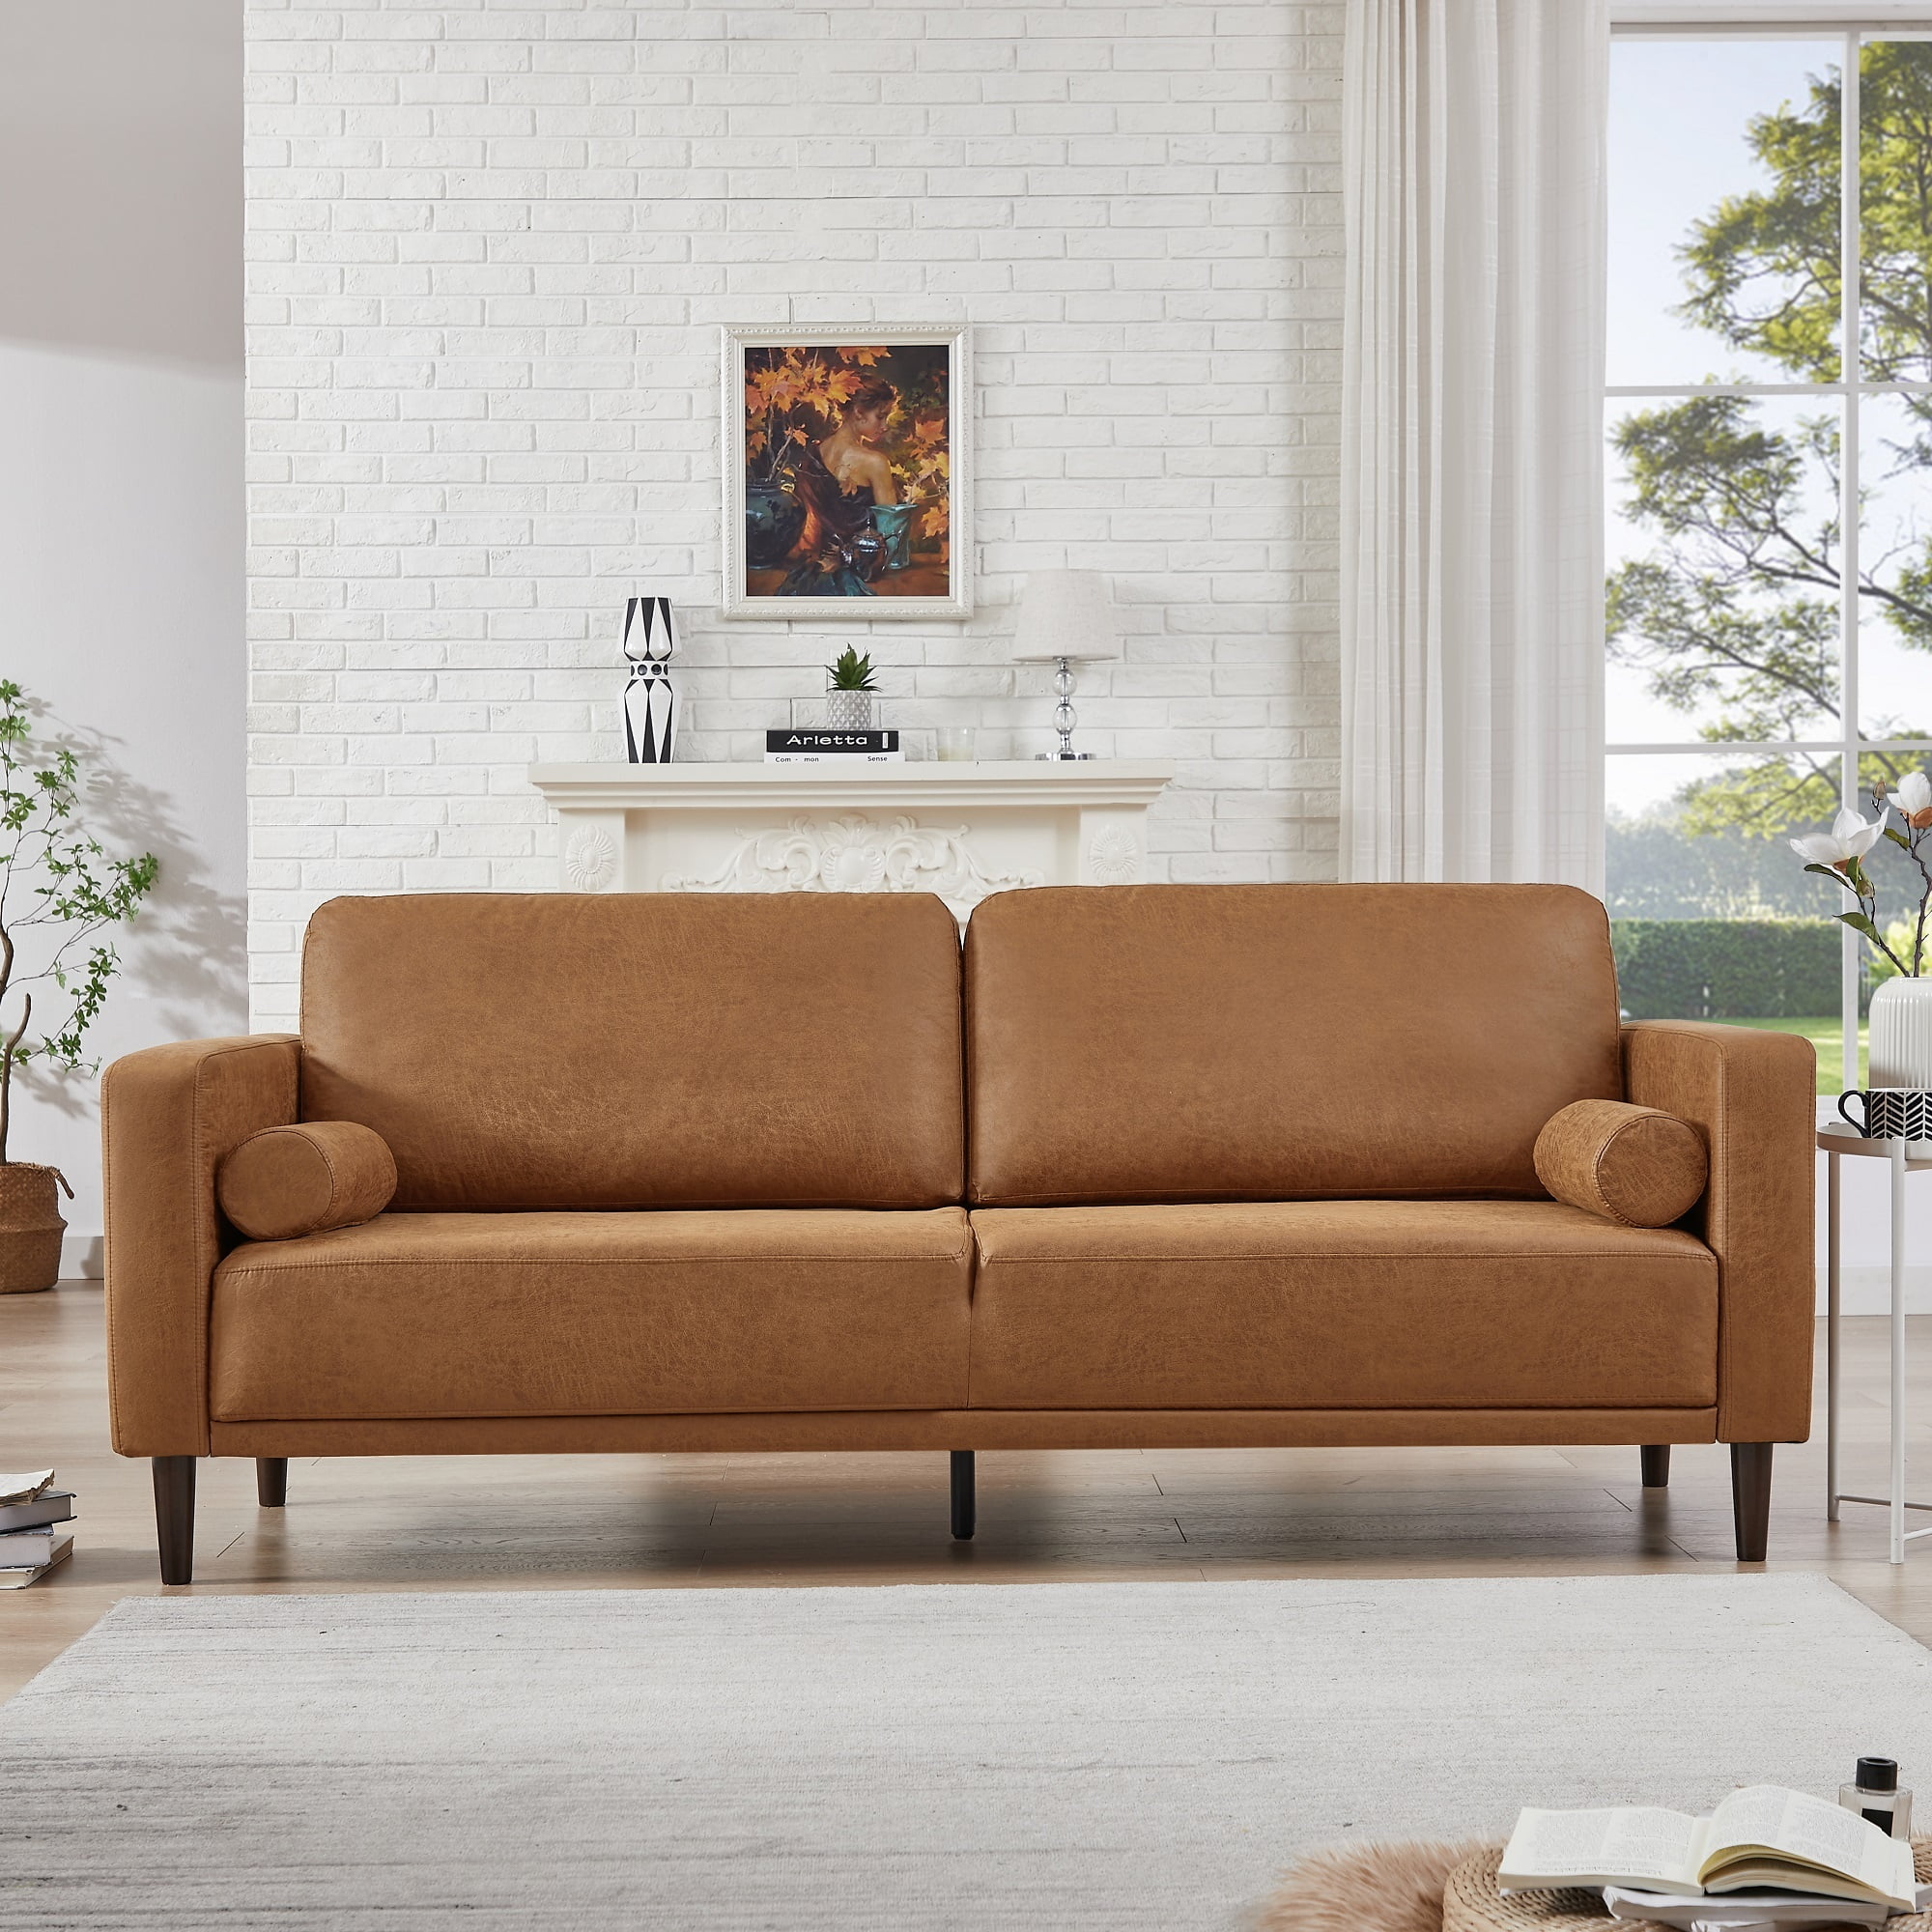 Homfa 3 Seat Sofa, Couch Camel with Large PU Upholstered 78.9\'\' Square Modern Arm